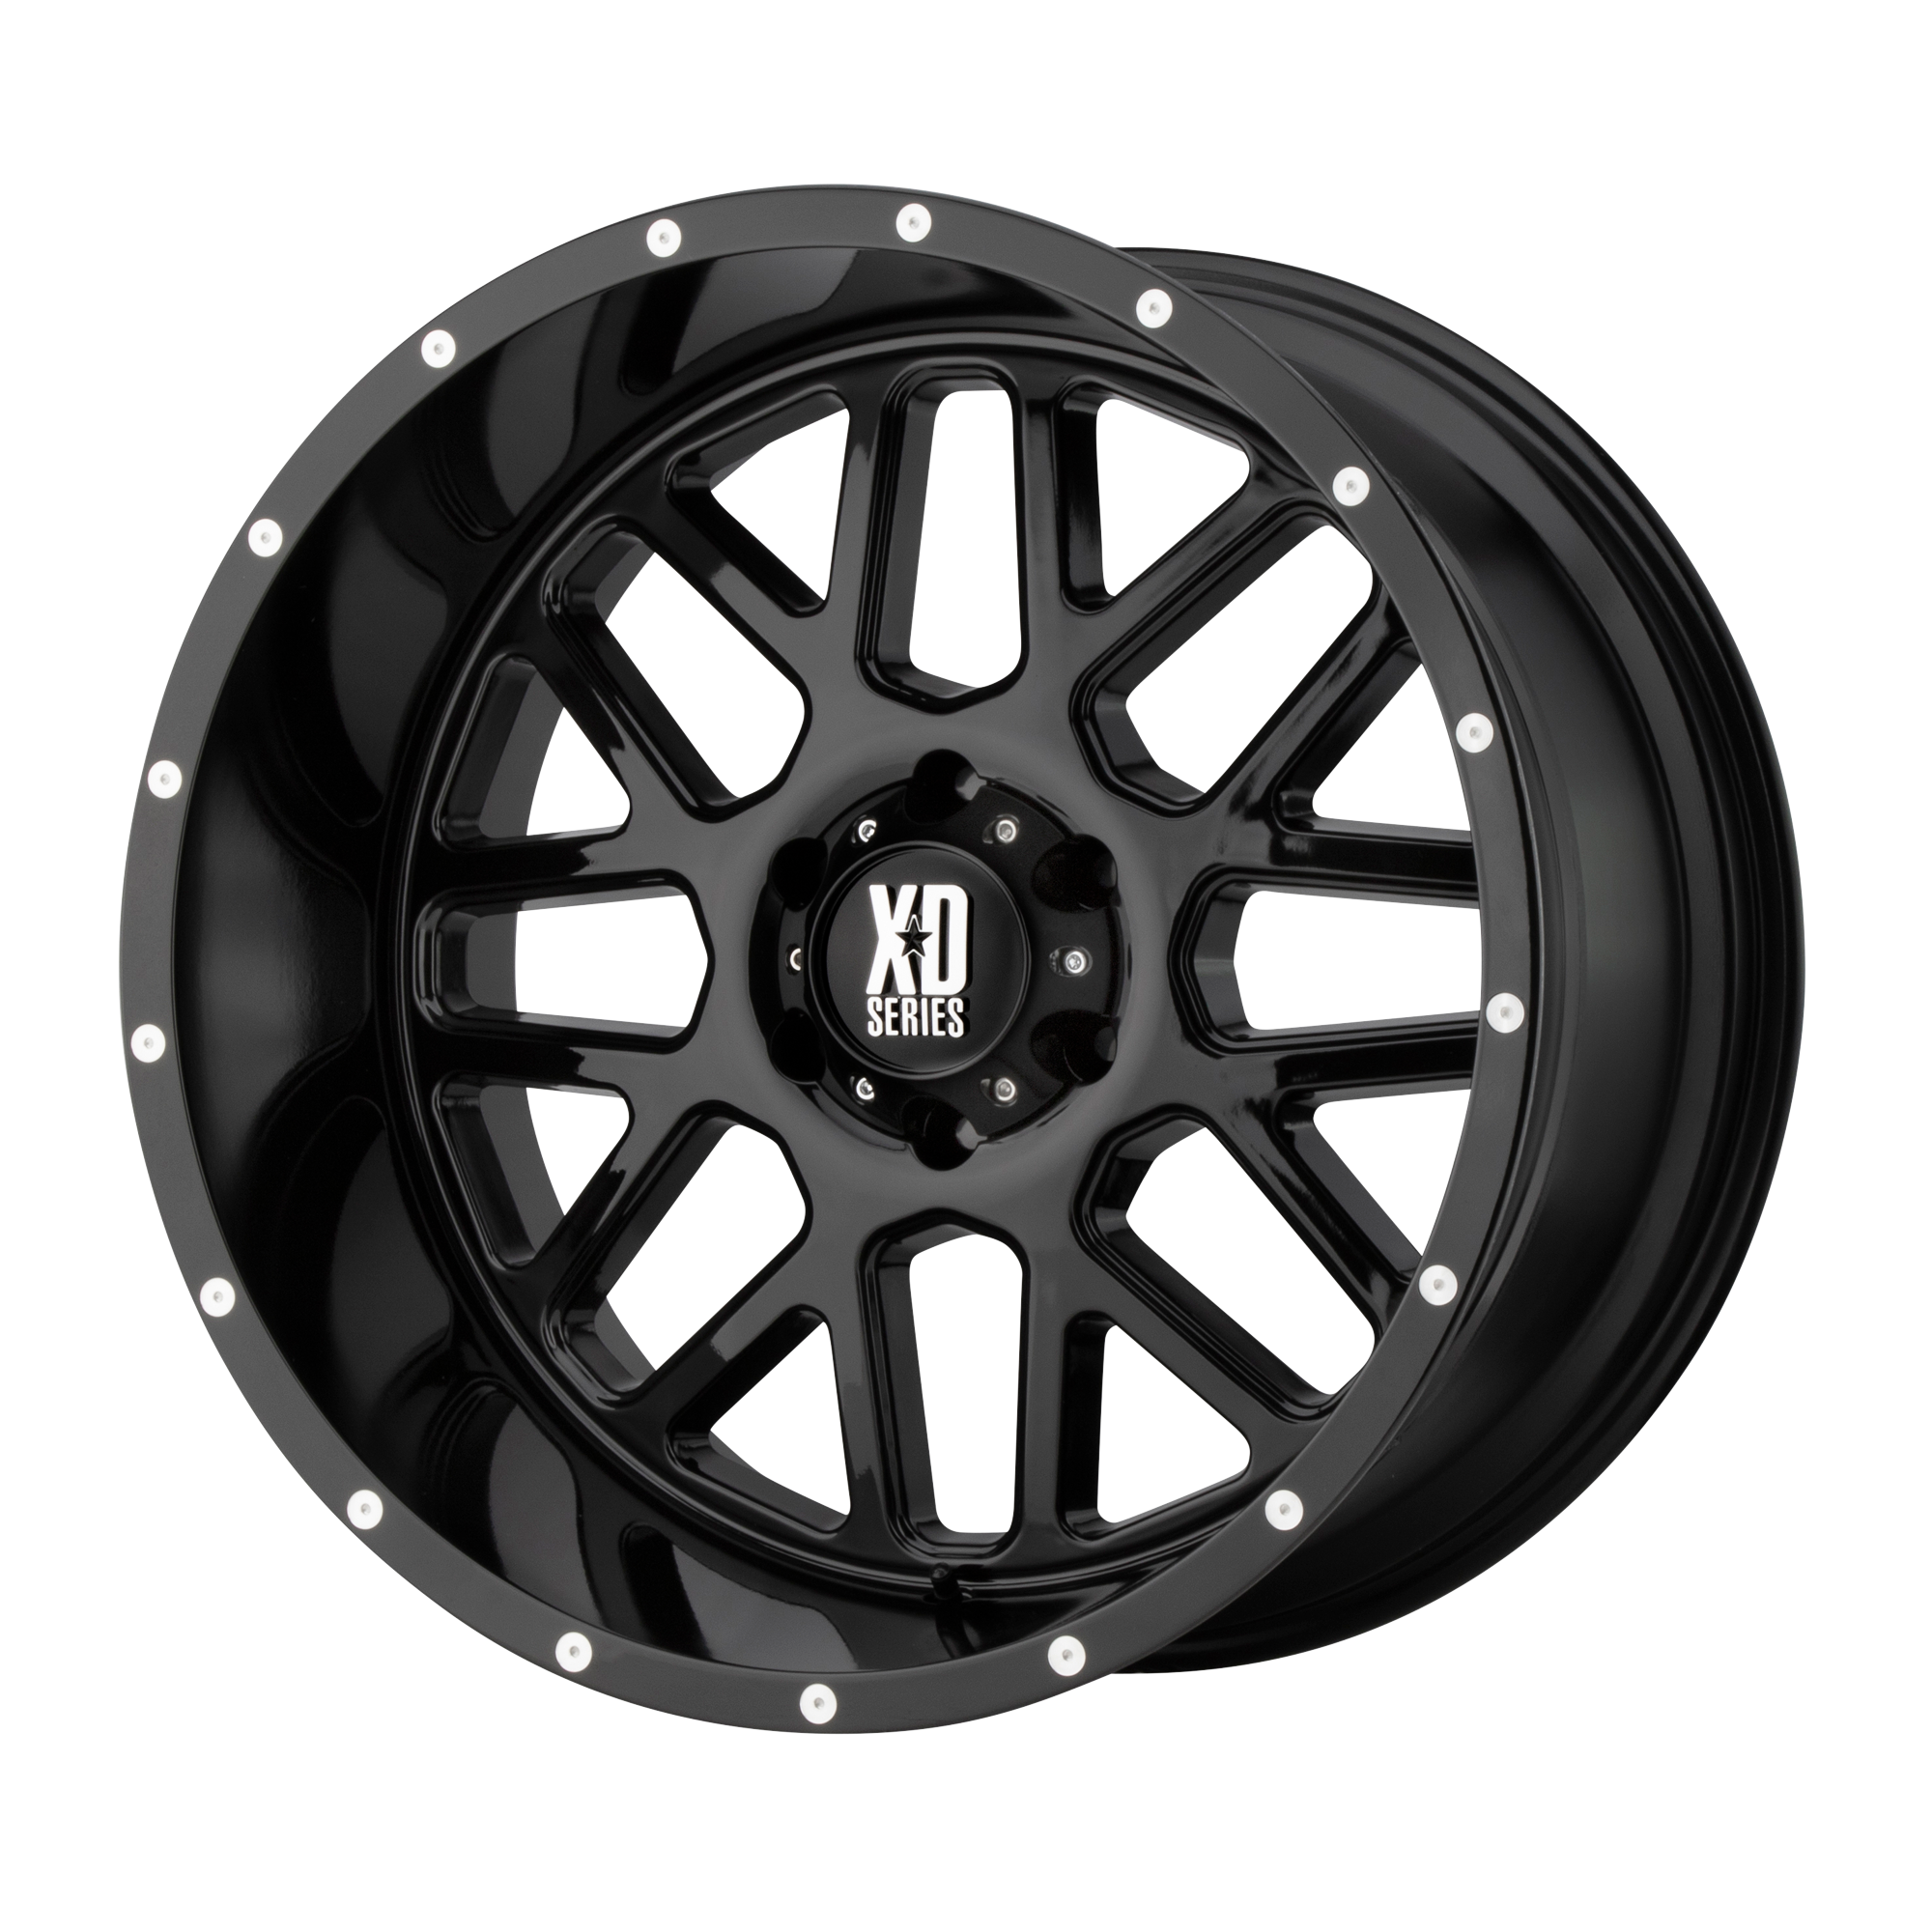 GRENADE 20x10 6x139.70 GLOSS BLACK (-24 mm) - Tires and Engine Performance